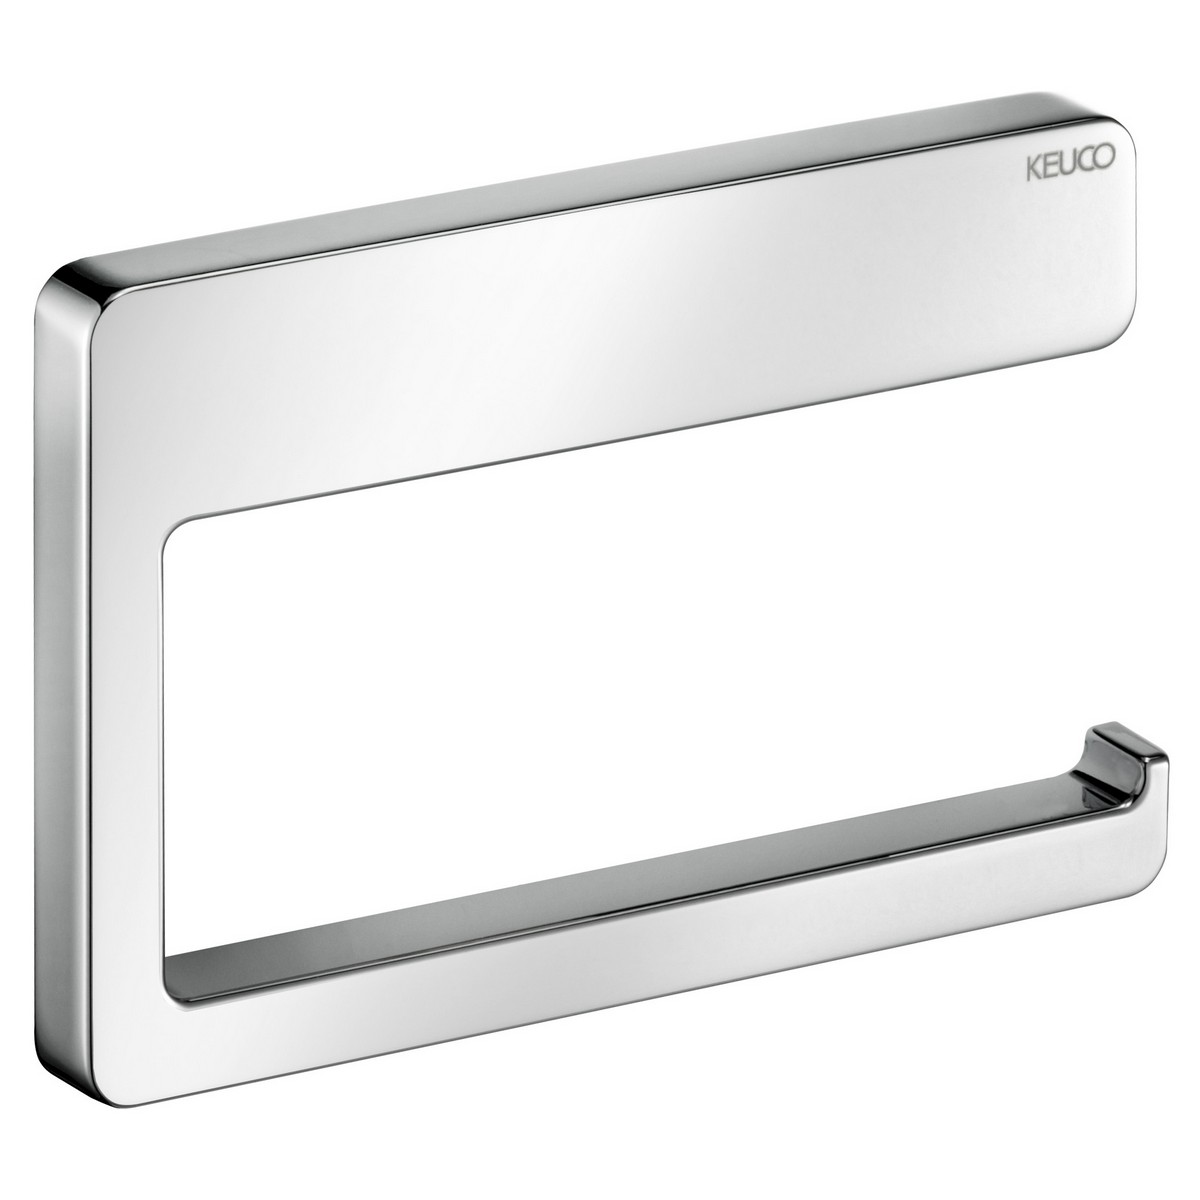 KEUCO 12762010000 MOLL 5 1/2 INCH WALL MOUNTED TOILET PAPER HOLDER IN POLISHED CHROME